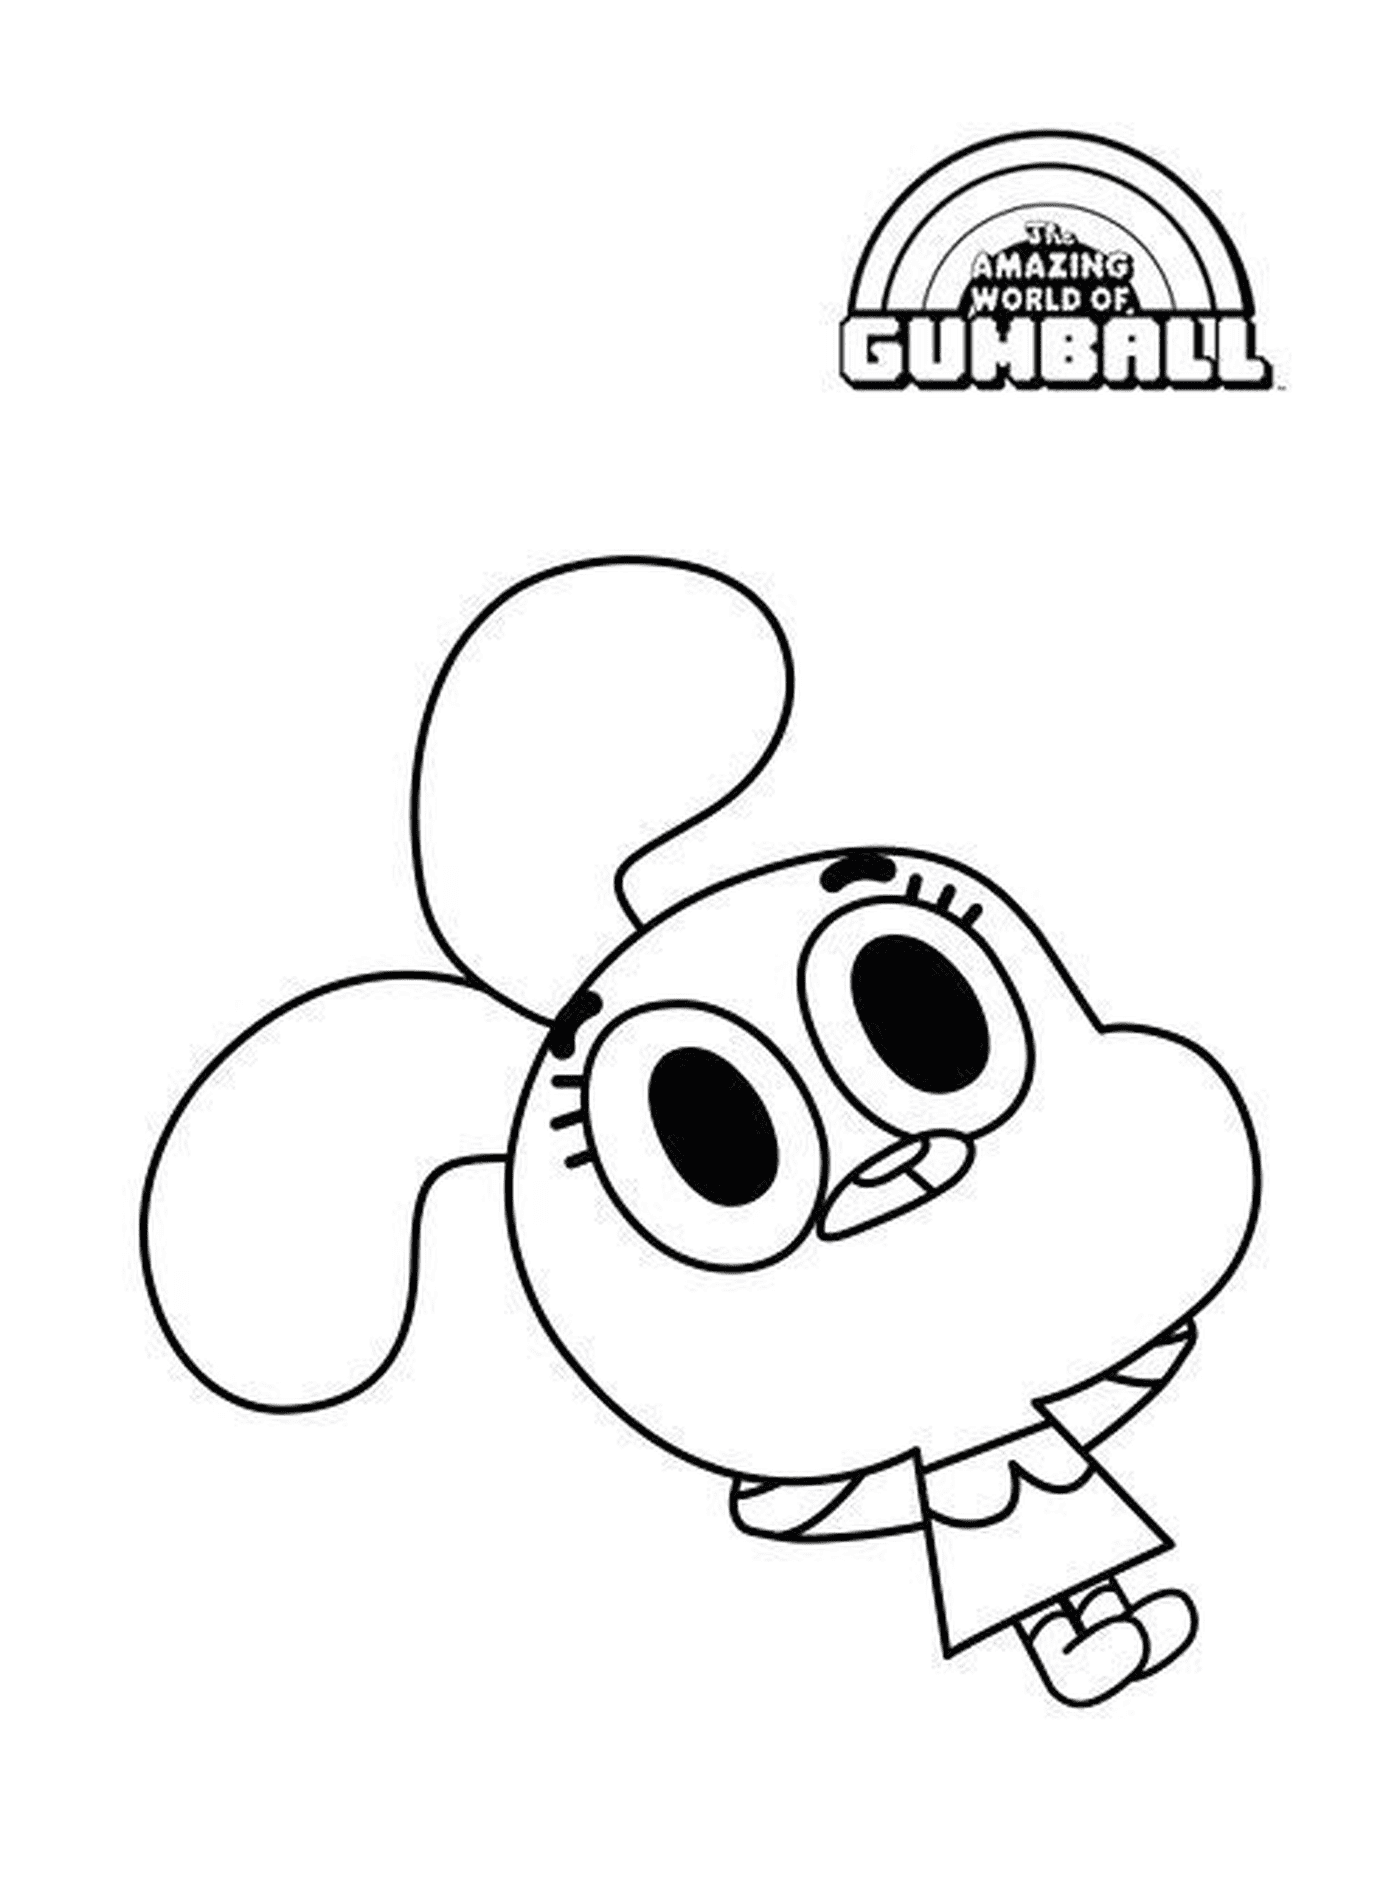  Adorable little sister of Gumball 